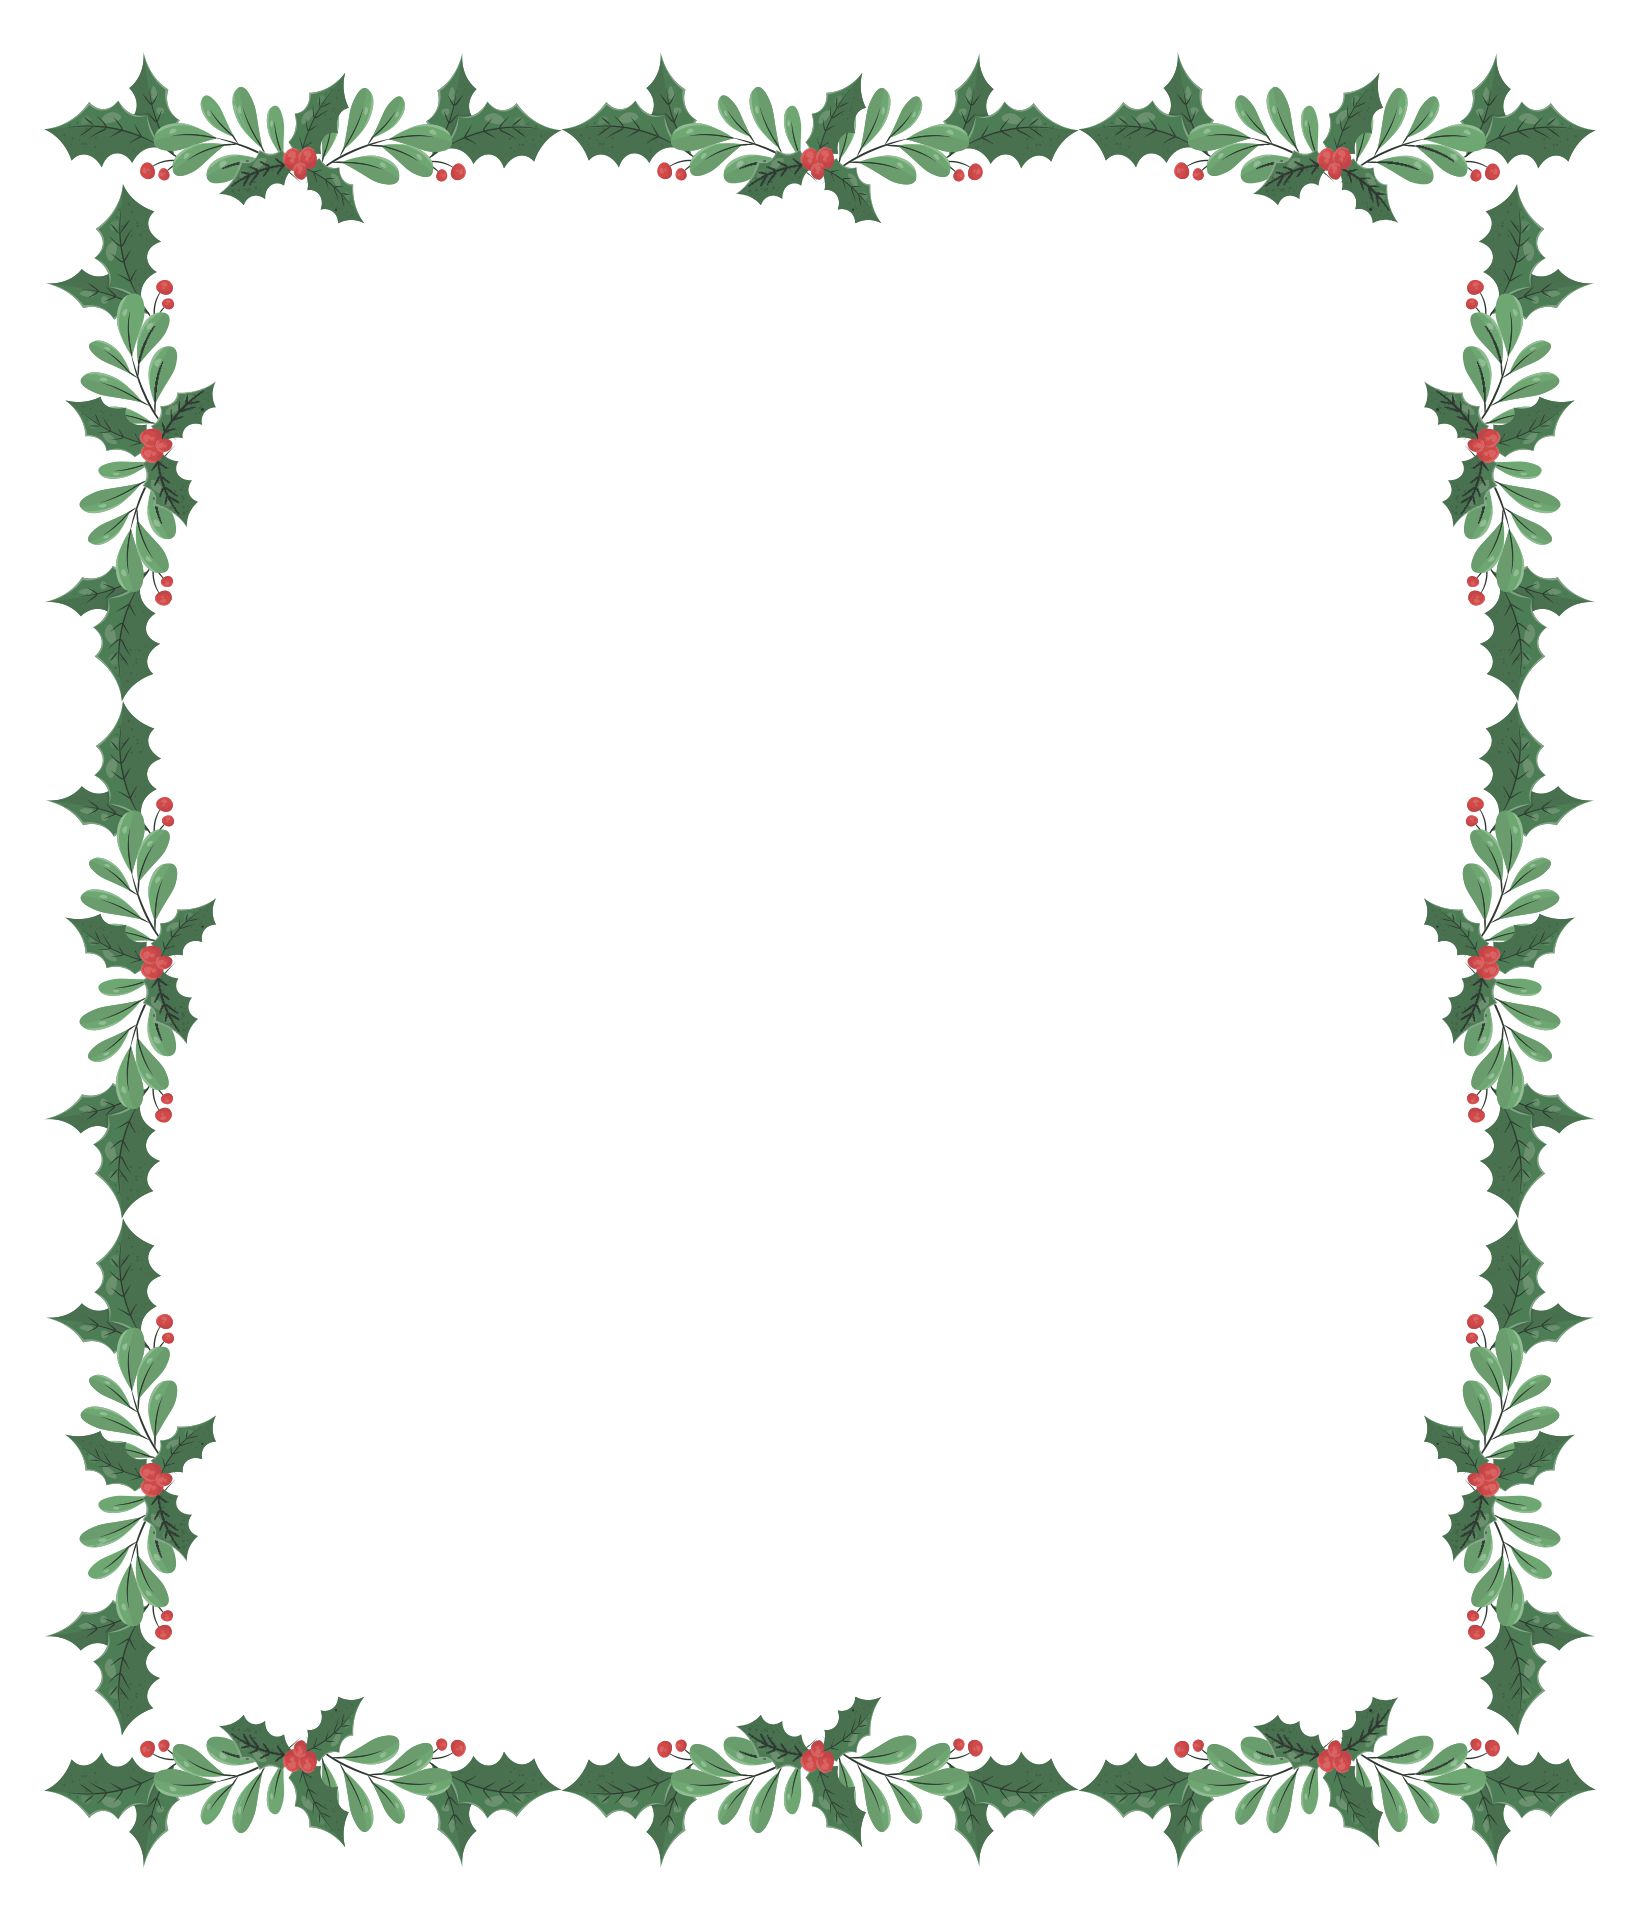 printable-christmas-border-paper-stationery-get-what-you-need-for-free